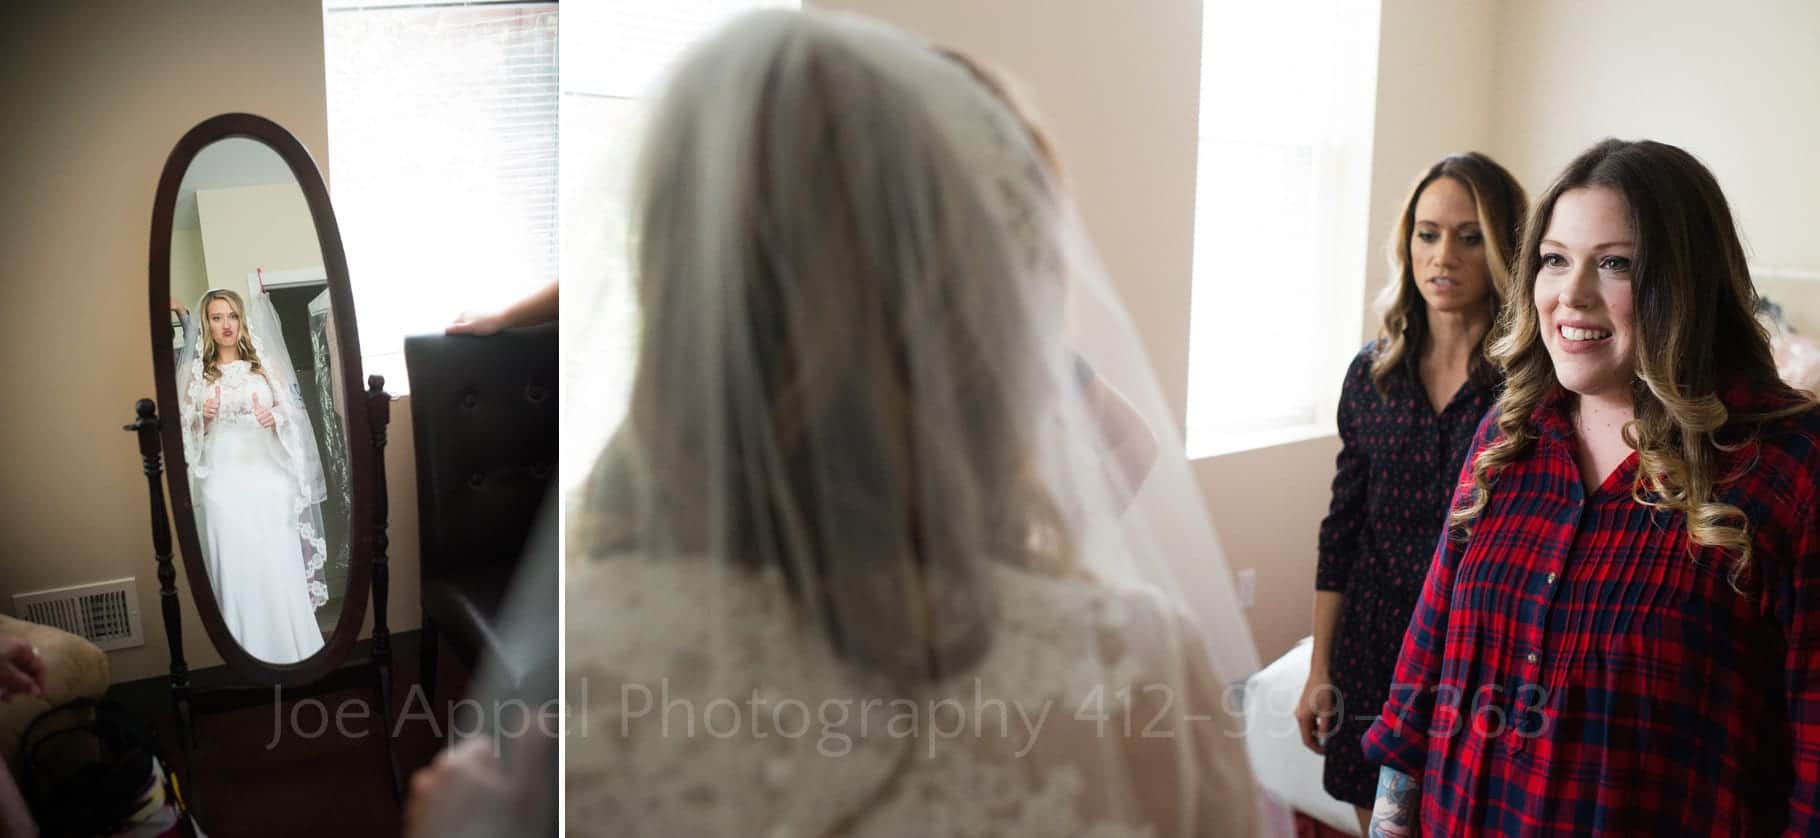 Two photos: A bride gives a thumbs up gesture as she looks at her reflection in an oval-shaped floor mirror. The second photo shows bridesmaids smiling as they look at the bride in her wedding dress.